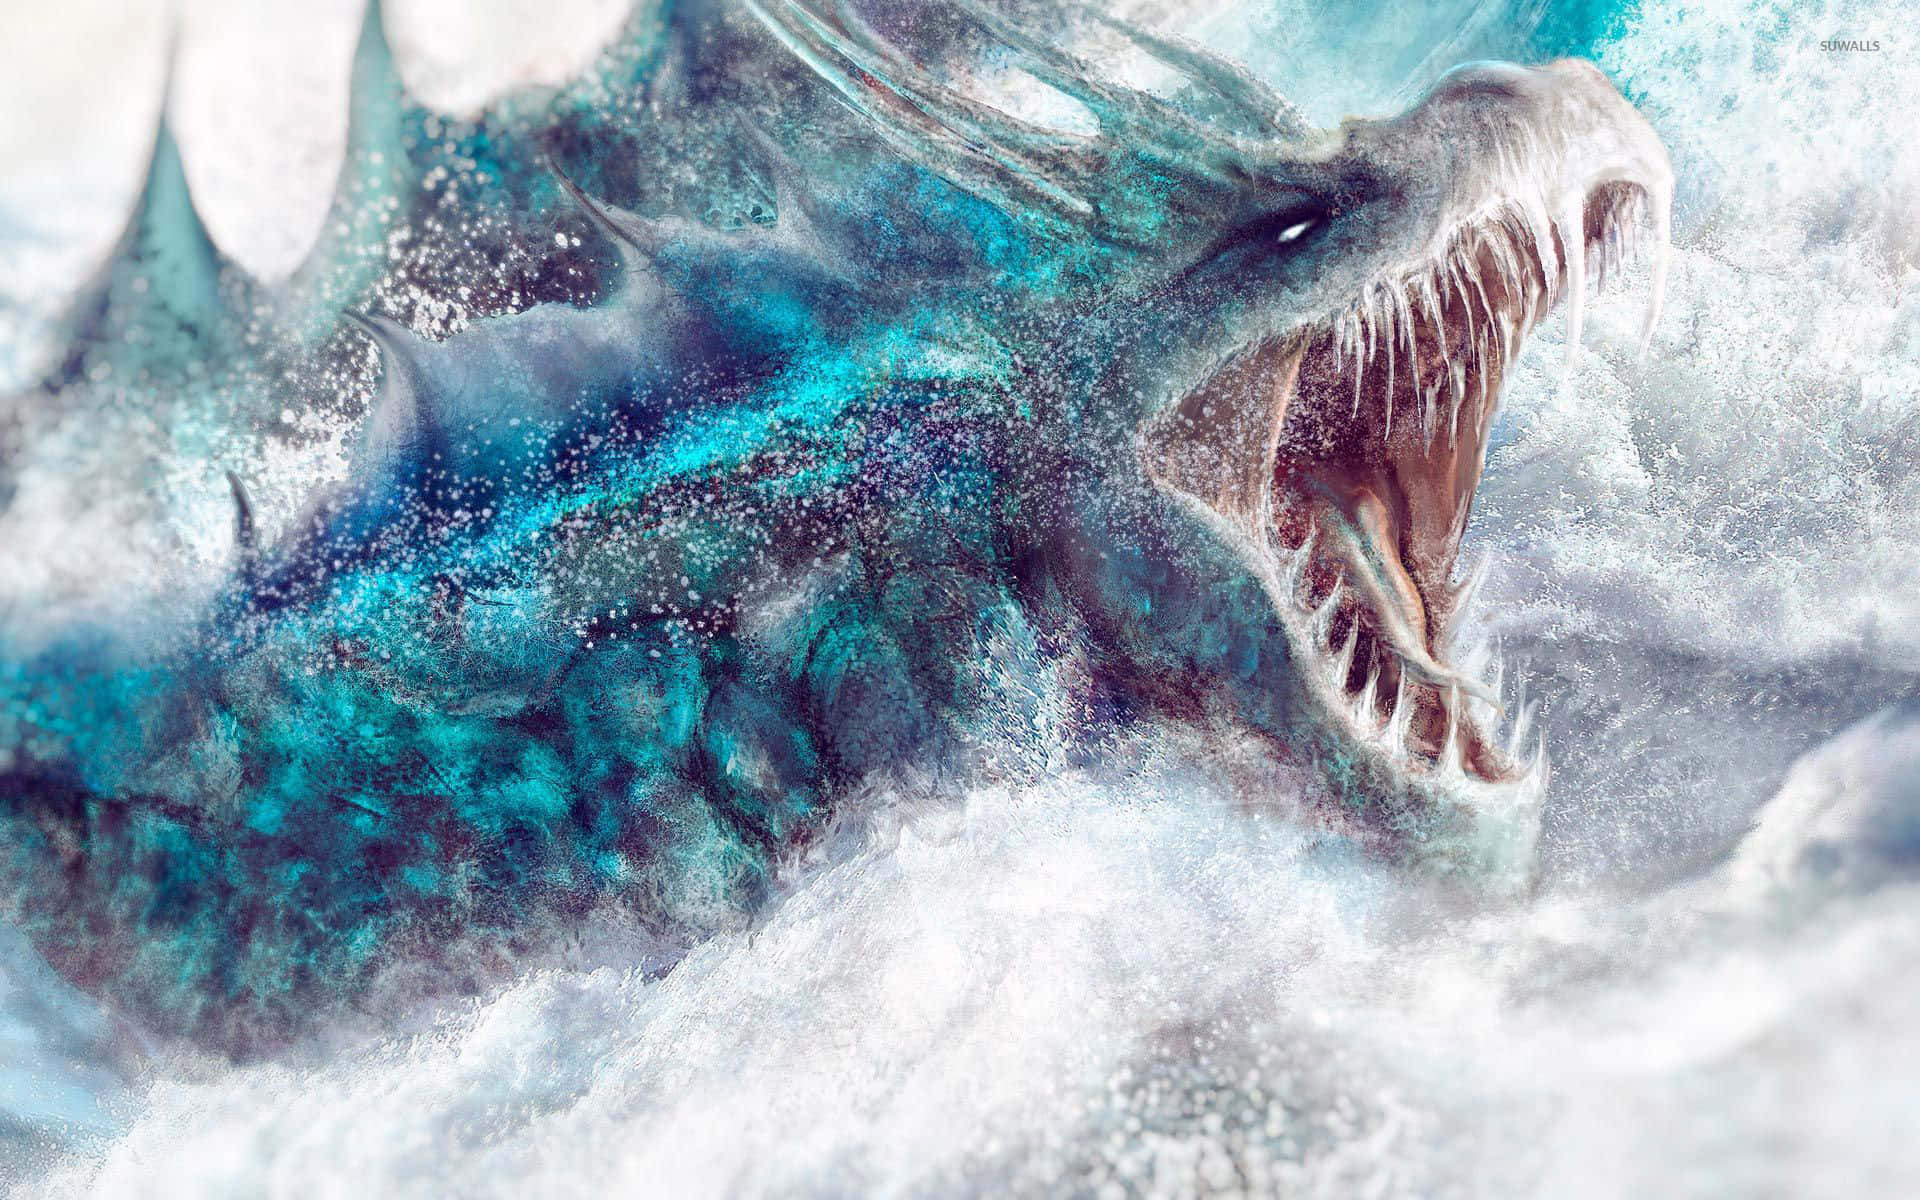 Majestic Sea Dragon Emerging From Waves Wallpaper